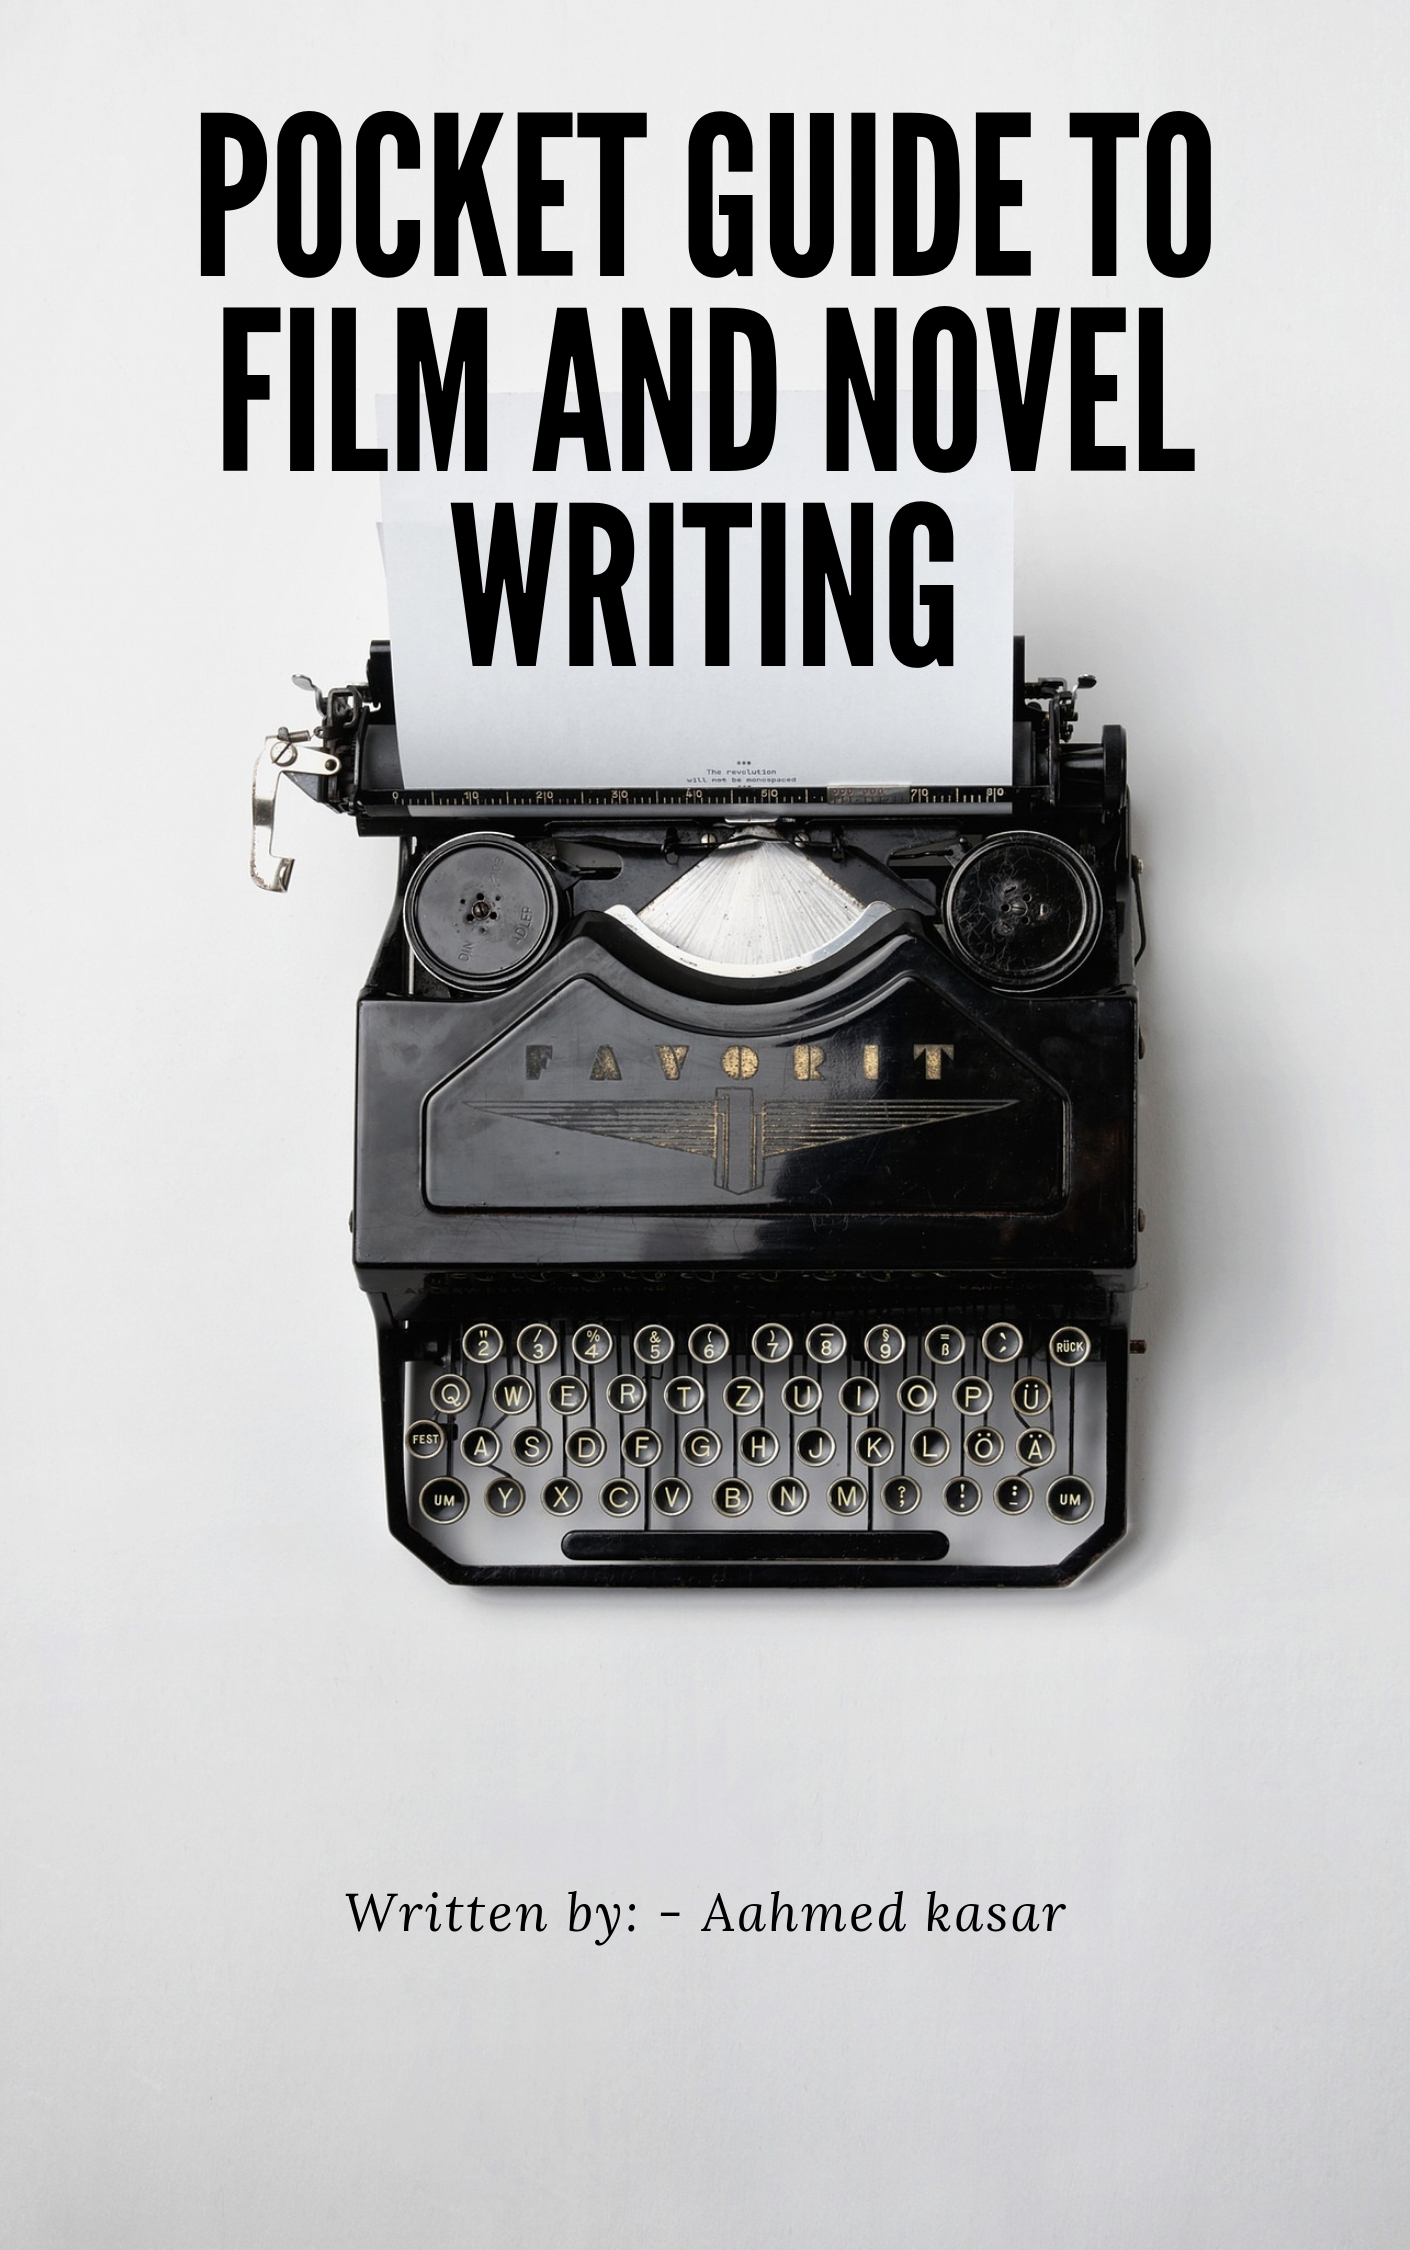 FREE: Pocket guide to film and novel writing by Aahmed Kasar